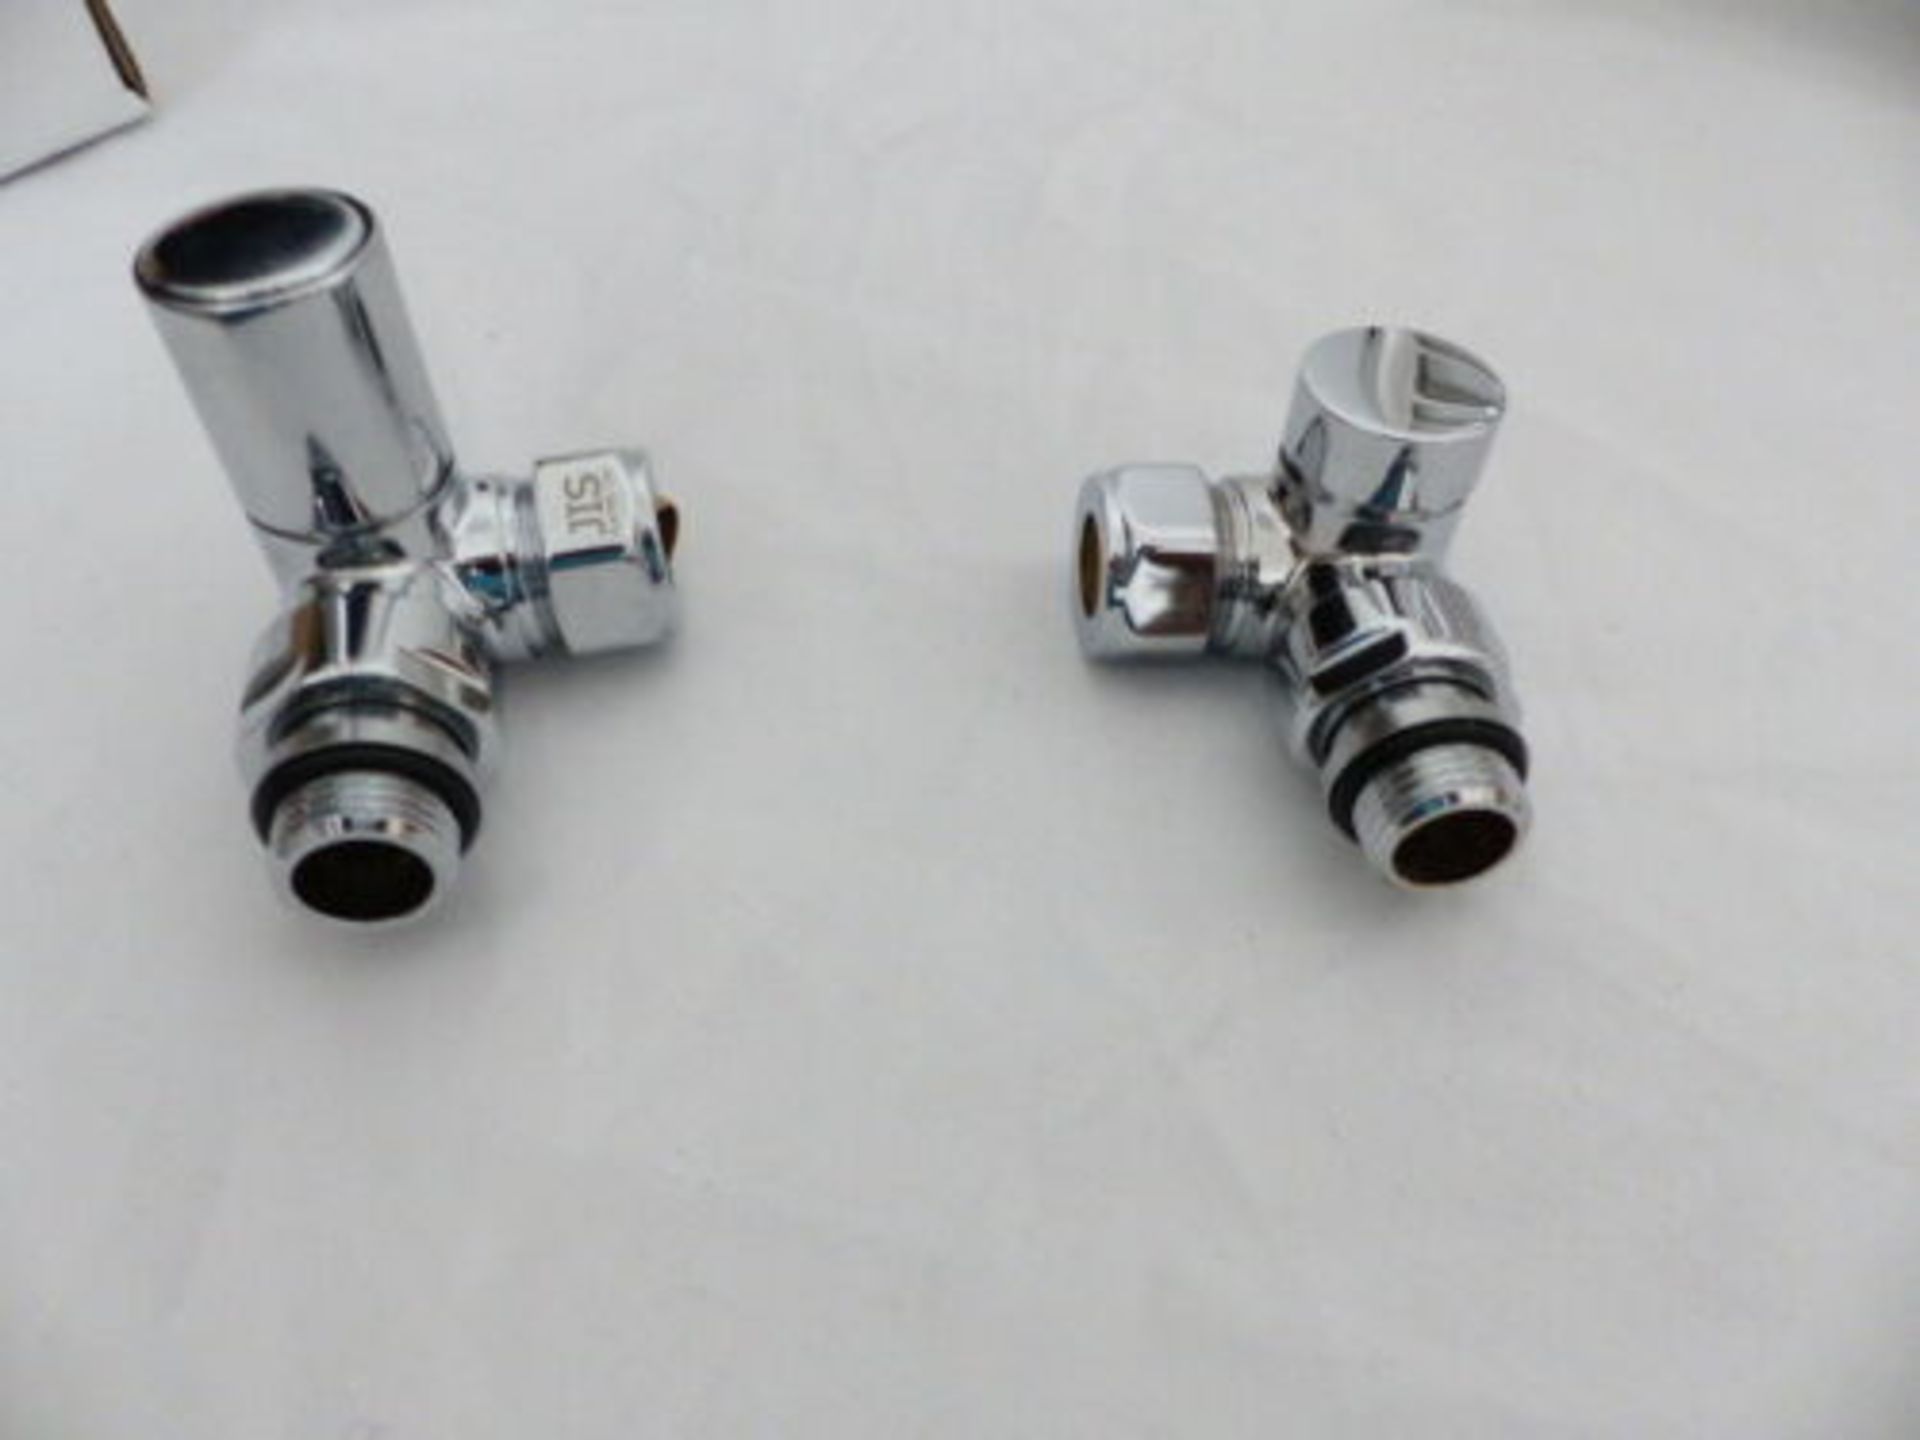 John Lewis Holkham Central Heated Towel Rail & Valves, from the Wall 37cm x 52cm (R8 - 9) - Image 4 of 4